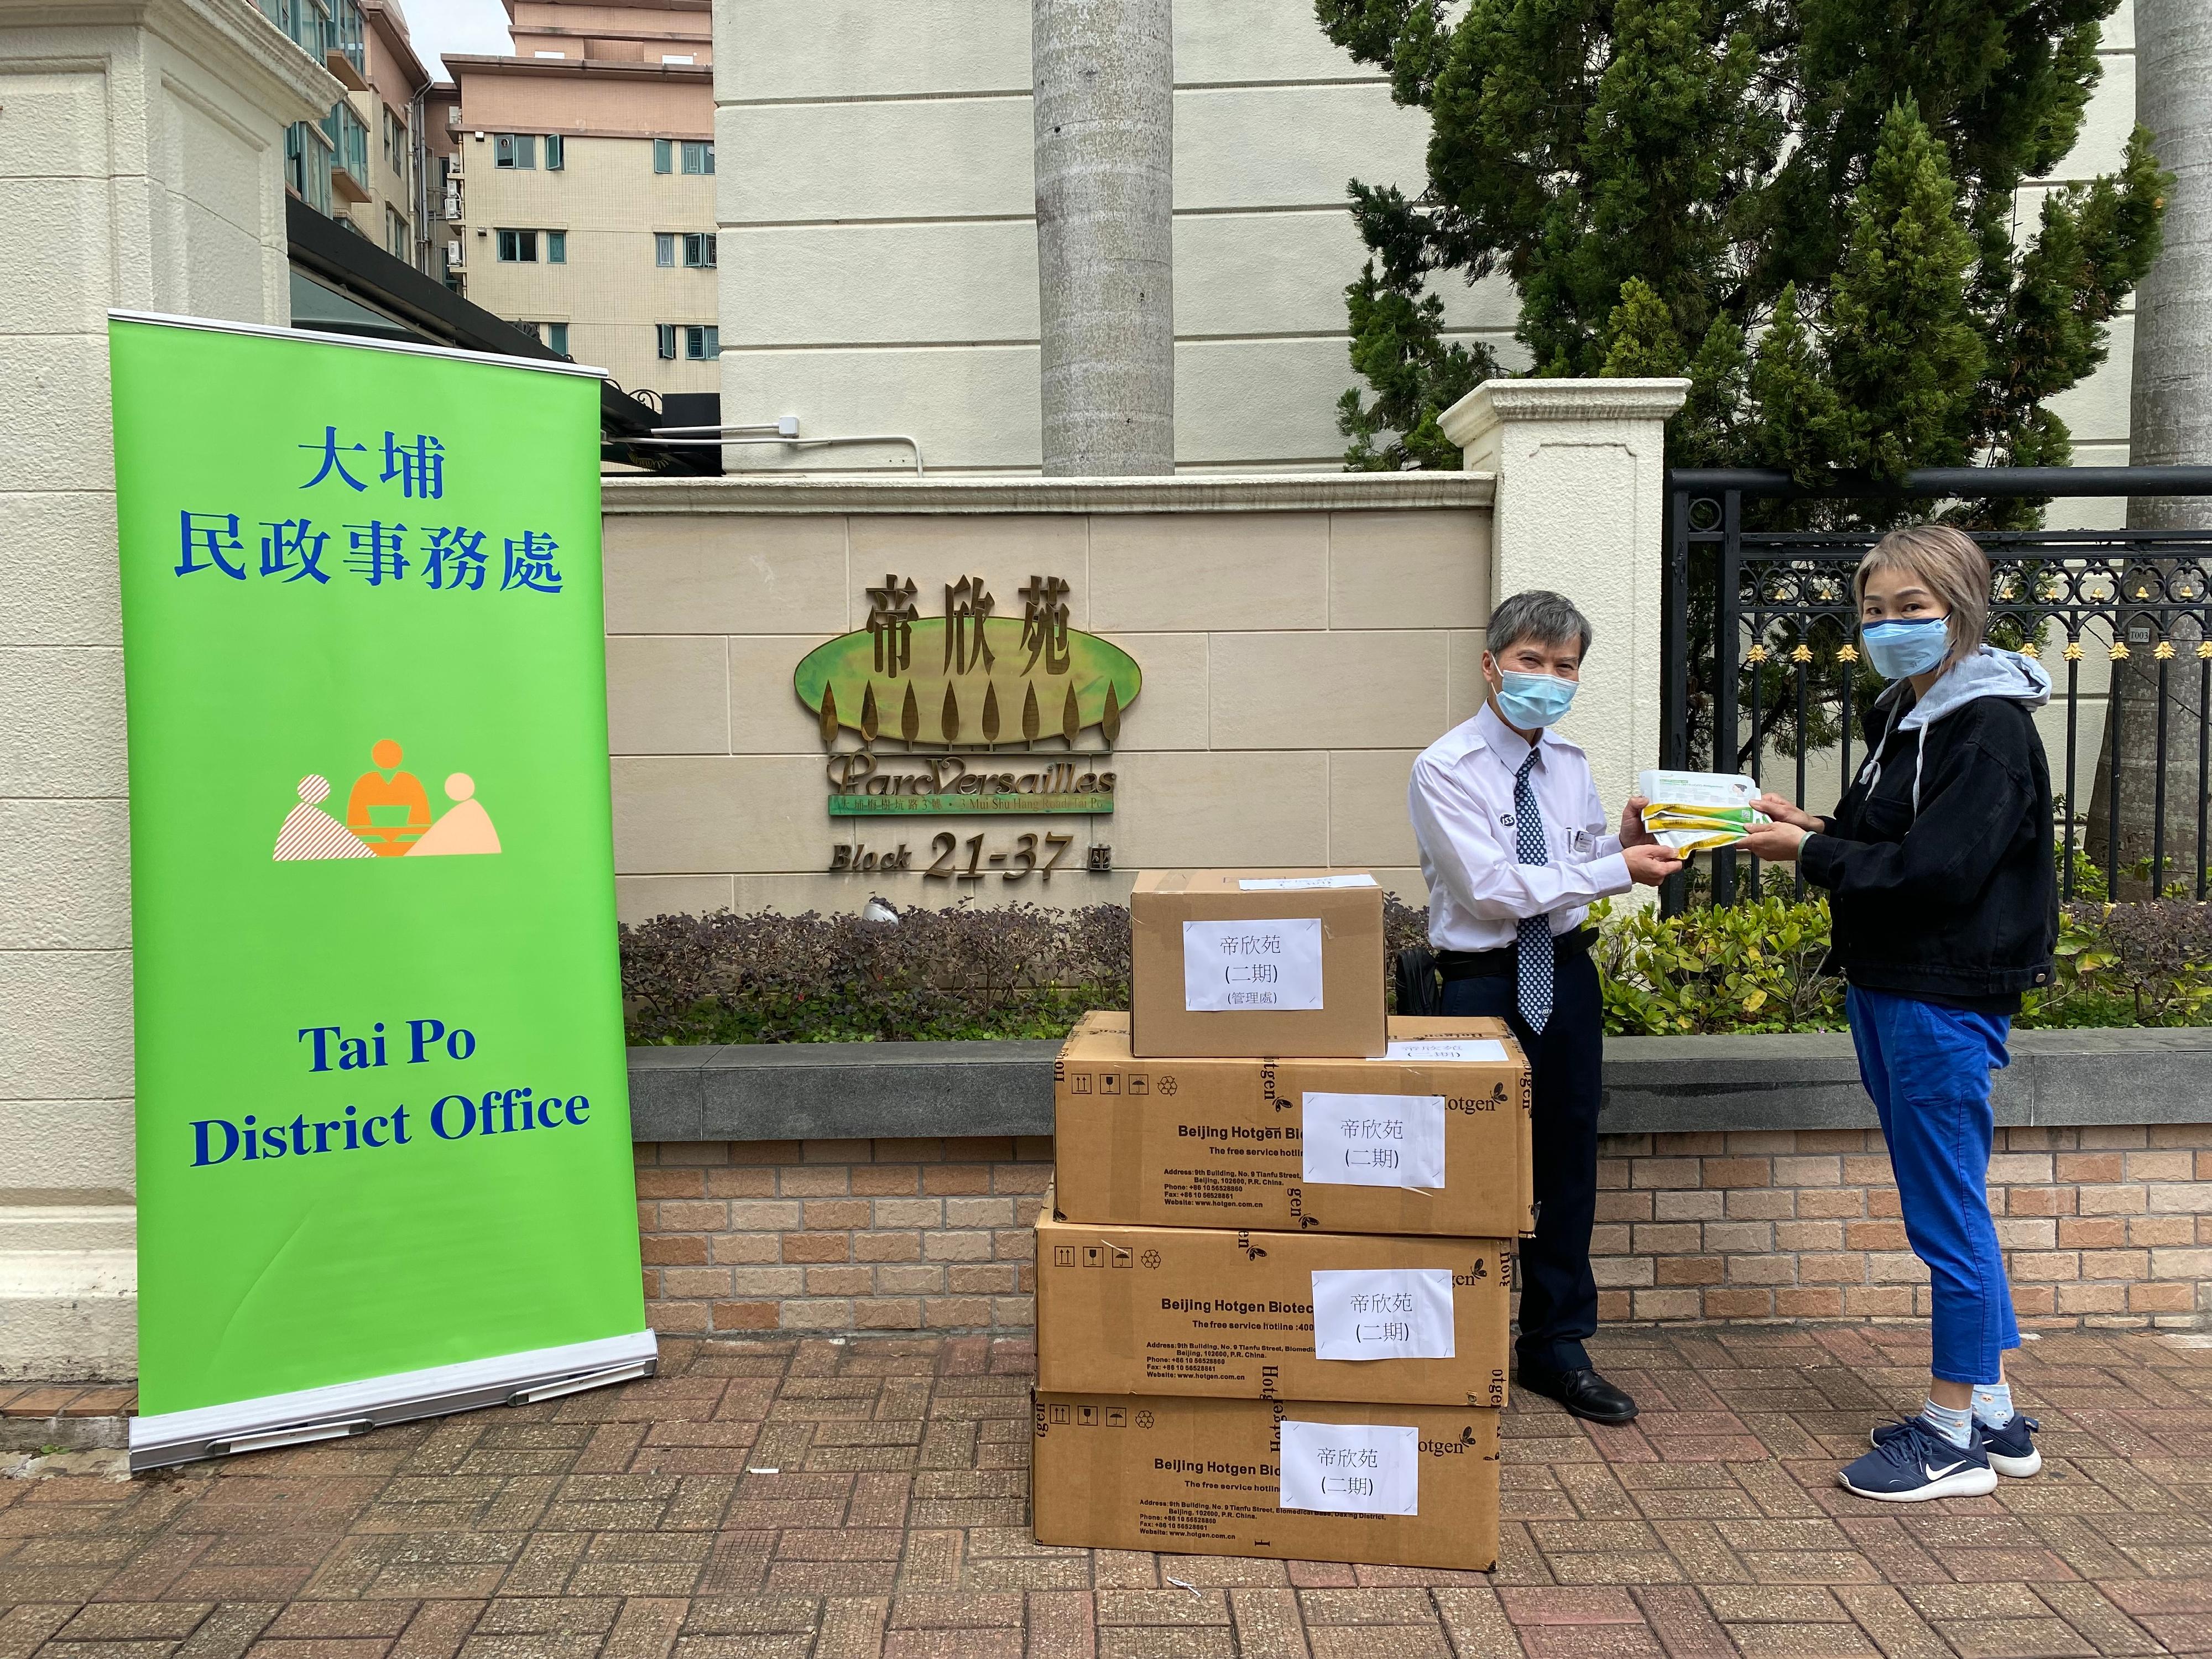 The Tai Po District Office today (March 6) distributed COVID-19 rapid test kits to households, cleansing workers and property management staff living and working in Parc Versailles for voluntary testing through the property management company.